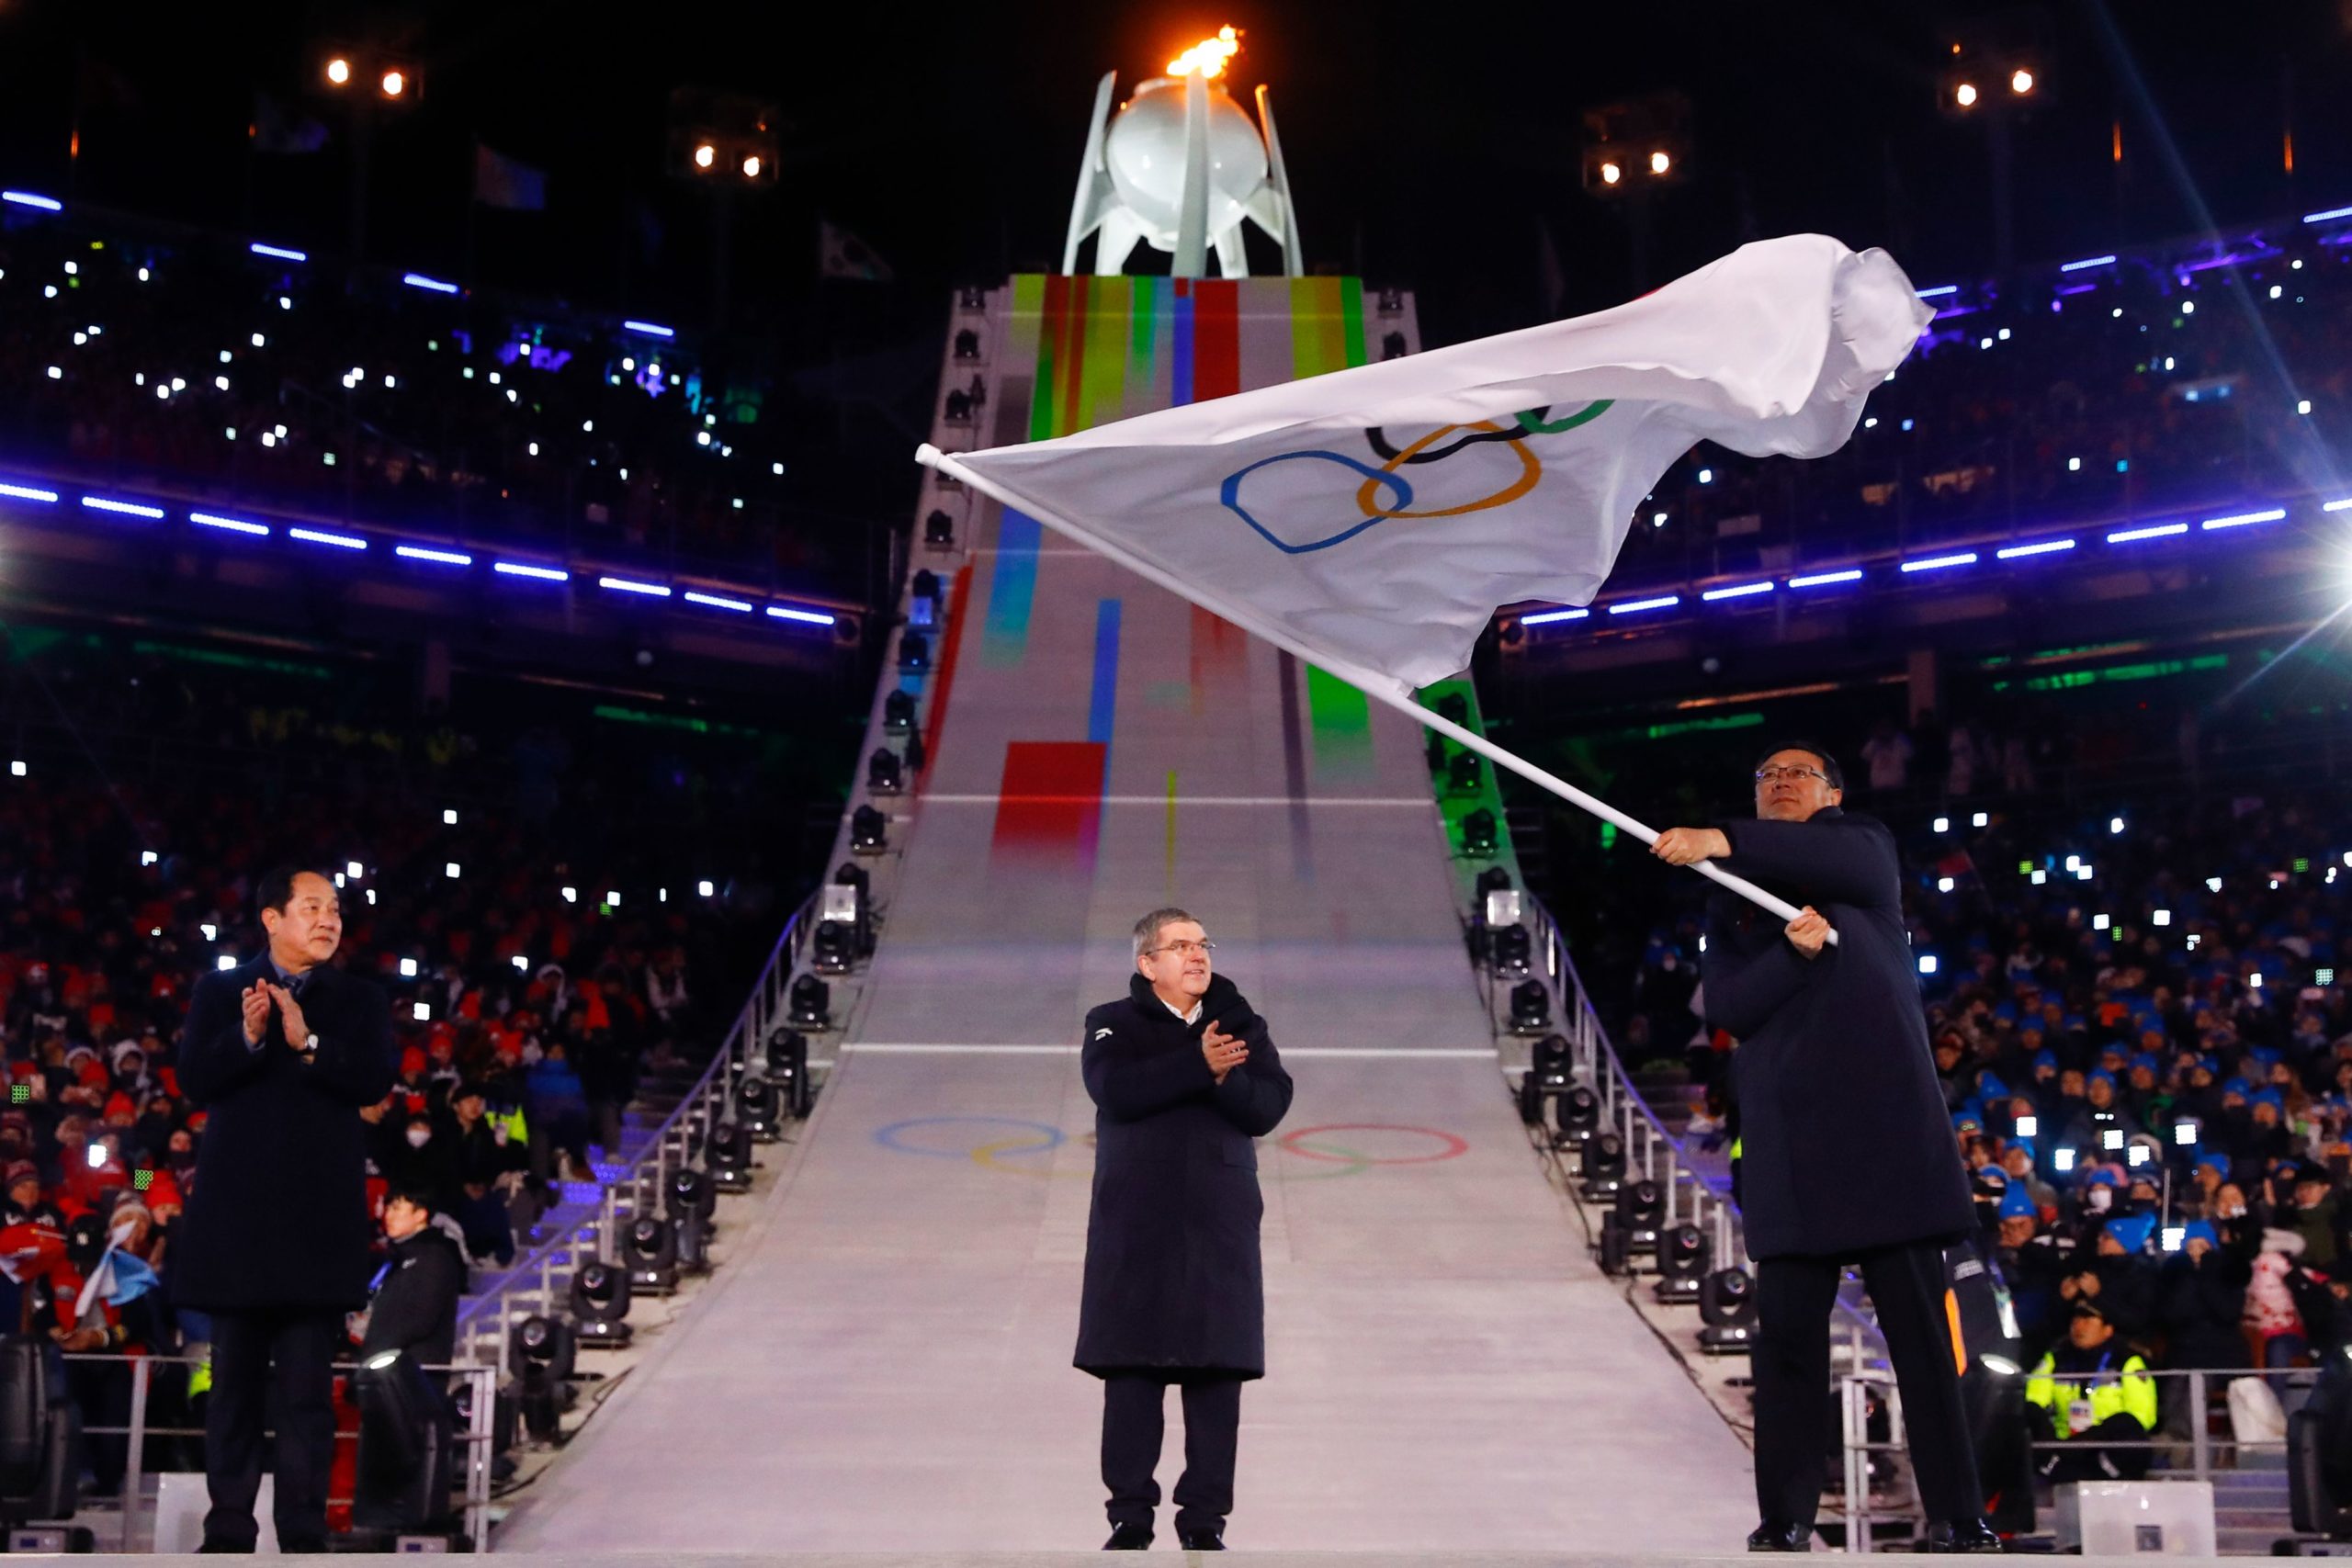 President of the International Olympic Committee Thomas Bach claps as the Mayor of Beijing Chen Jining waves the Olympic flag during the handover ceremony for the 2022 Beijing Winter Olympic Games. (Kai Pfaffenbach/Pool/AFP via Getty Images)